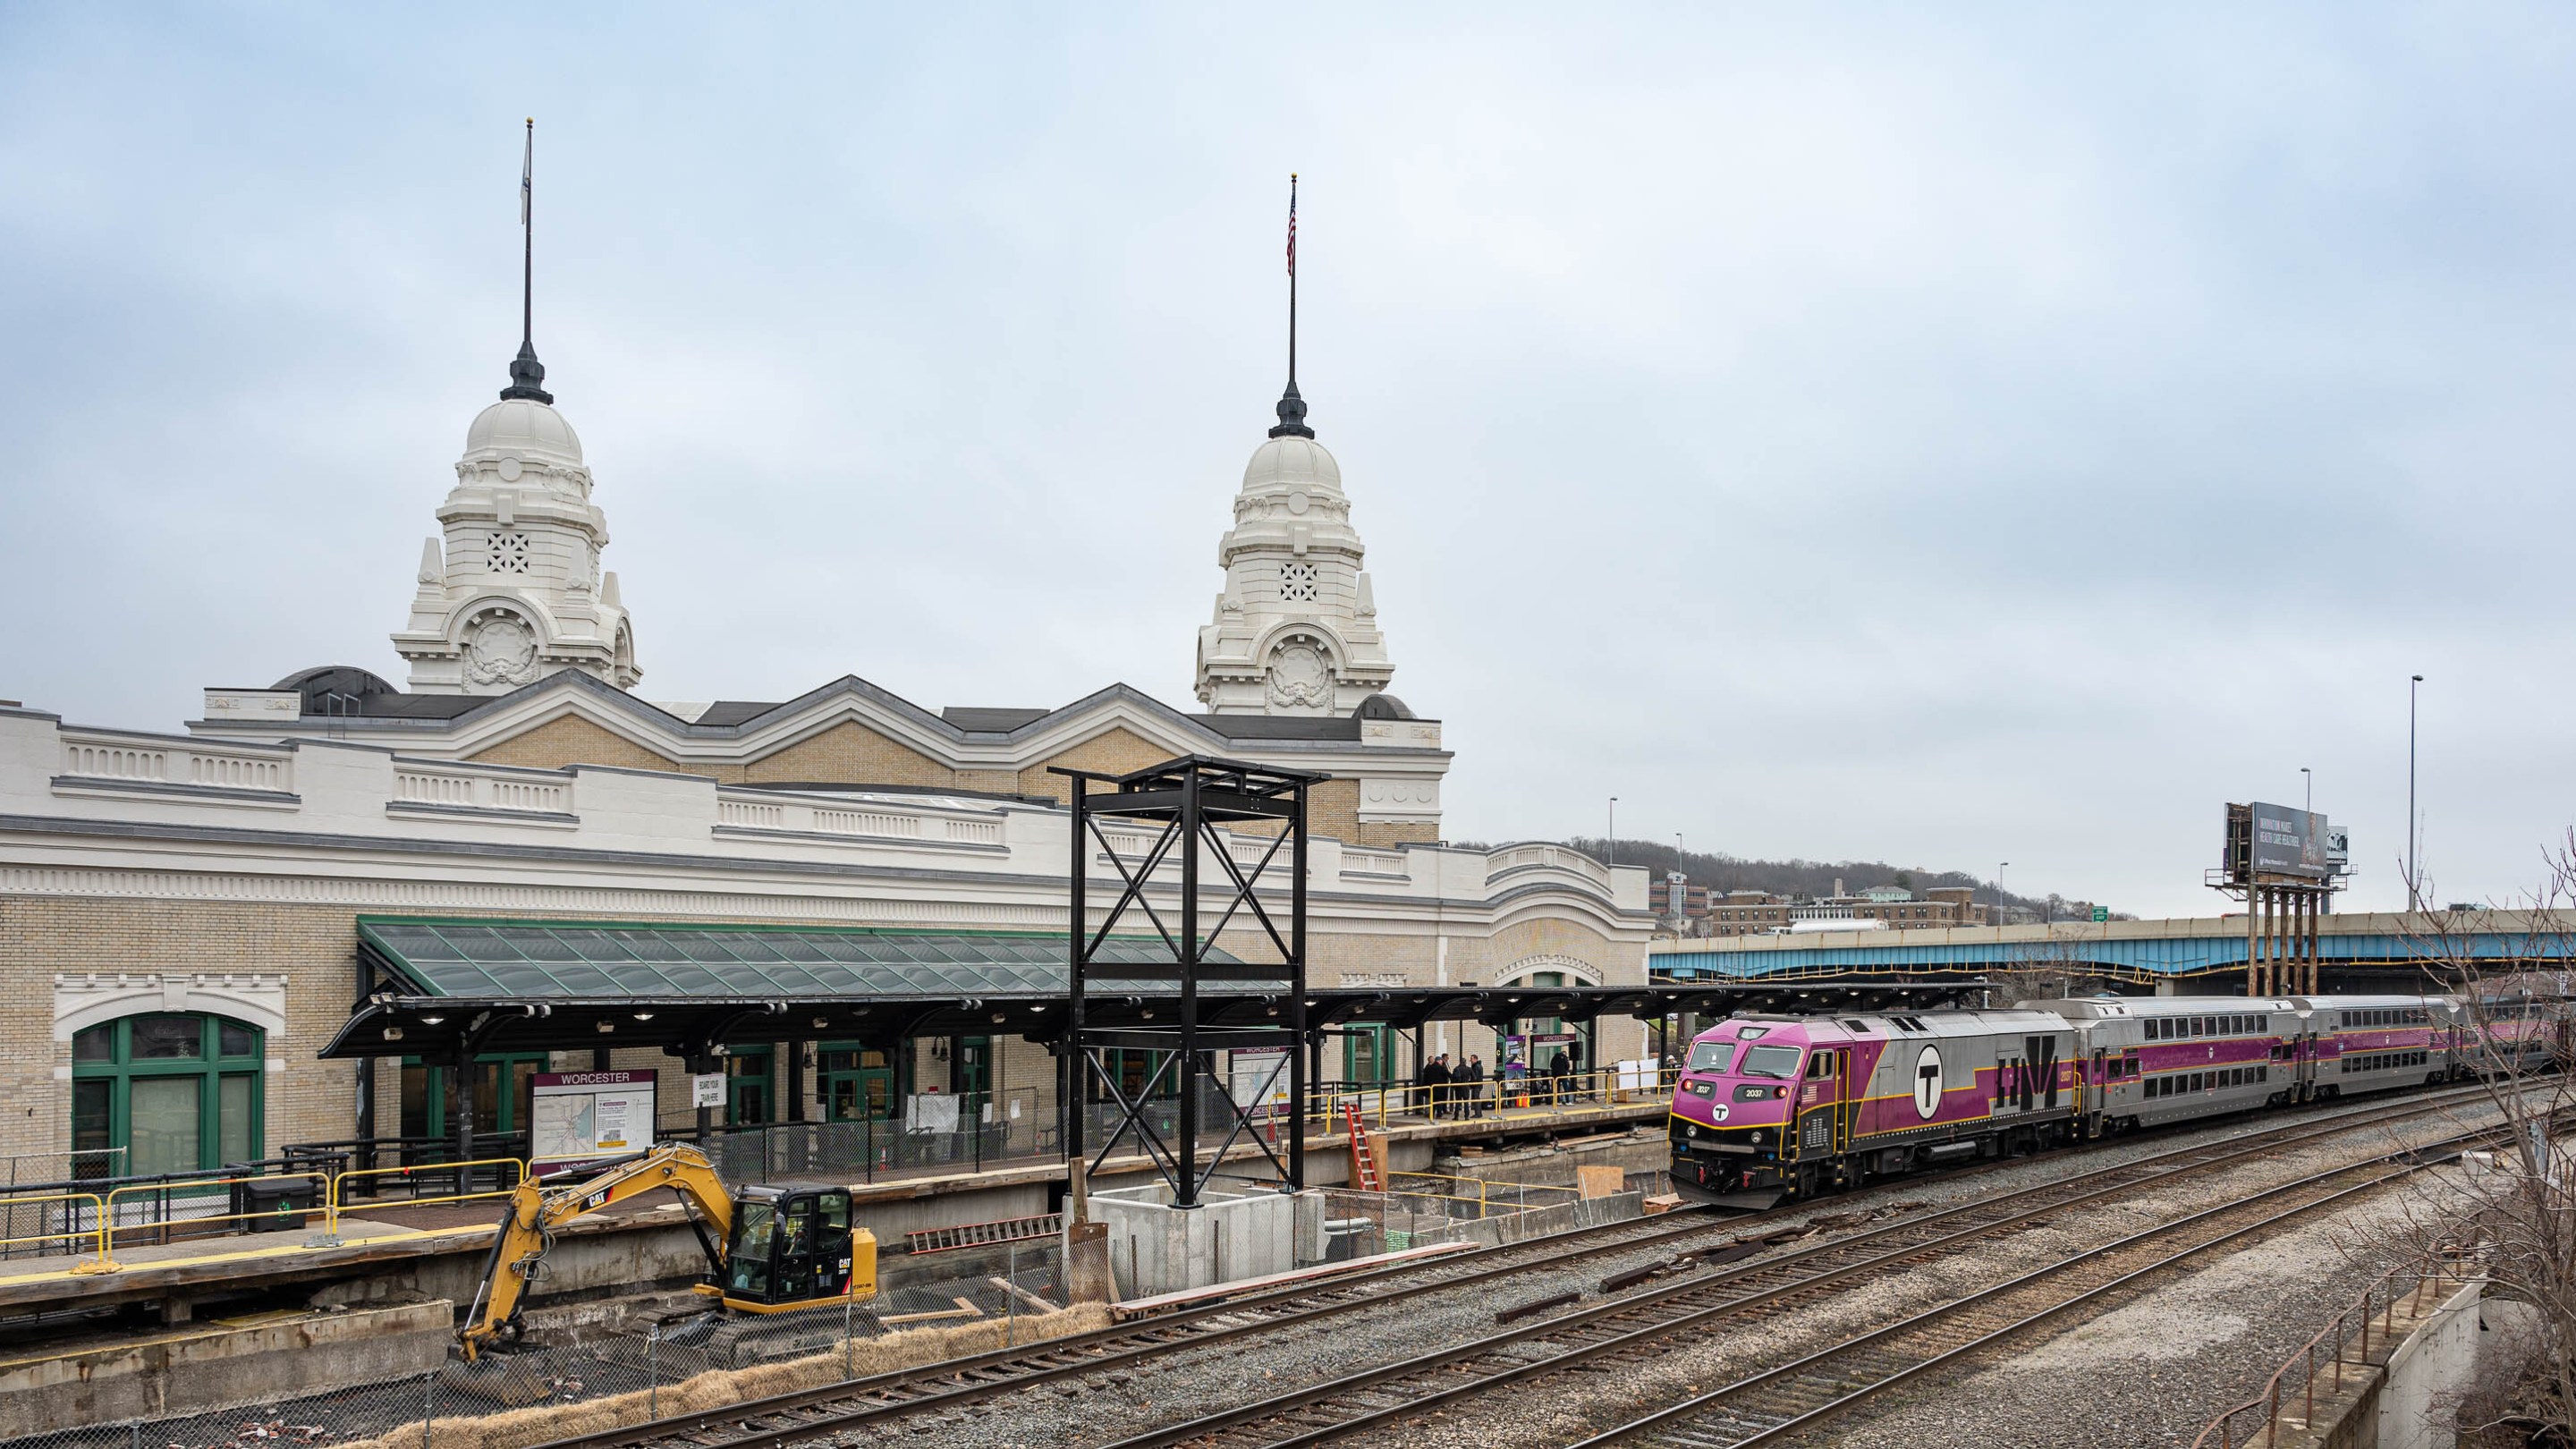 An MBTA commuter rail train with a purple front and a T logo on its side approaches an under-construction station platform in the center of the image. In the right foreground are two other railroad tracks. To the left behind the platform are two domed spires rising above a train station building.